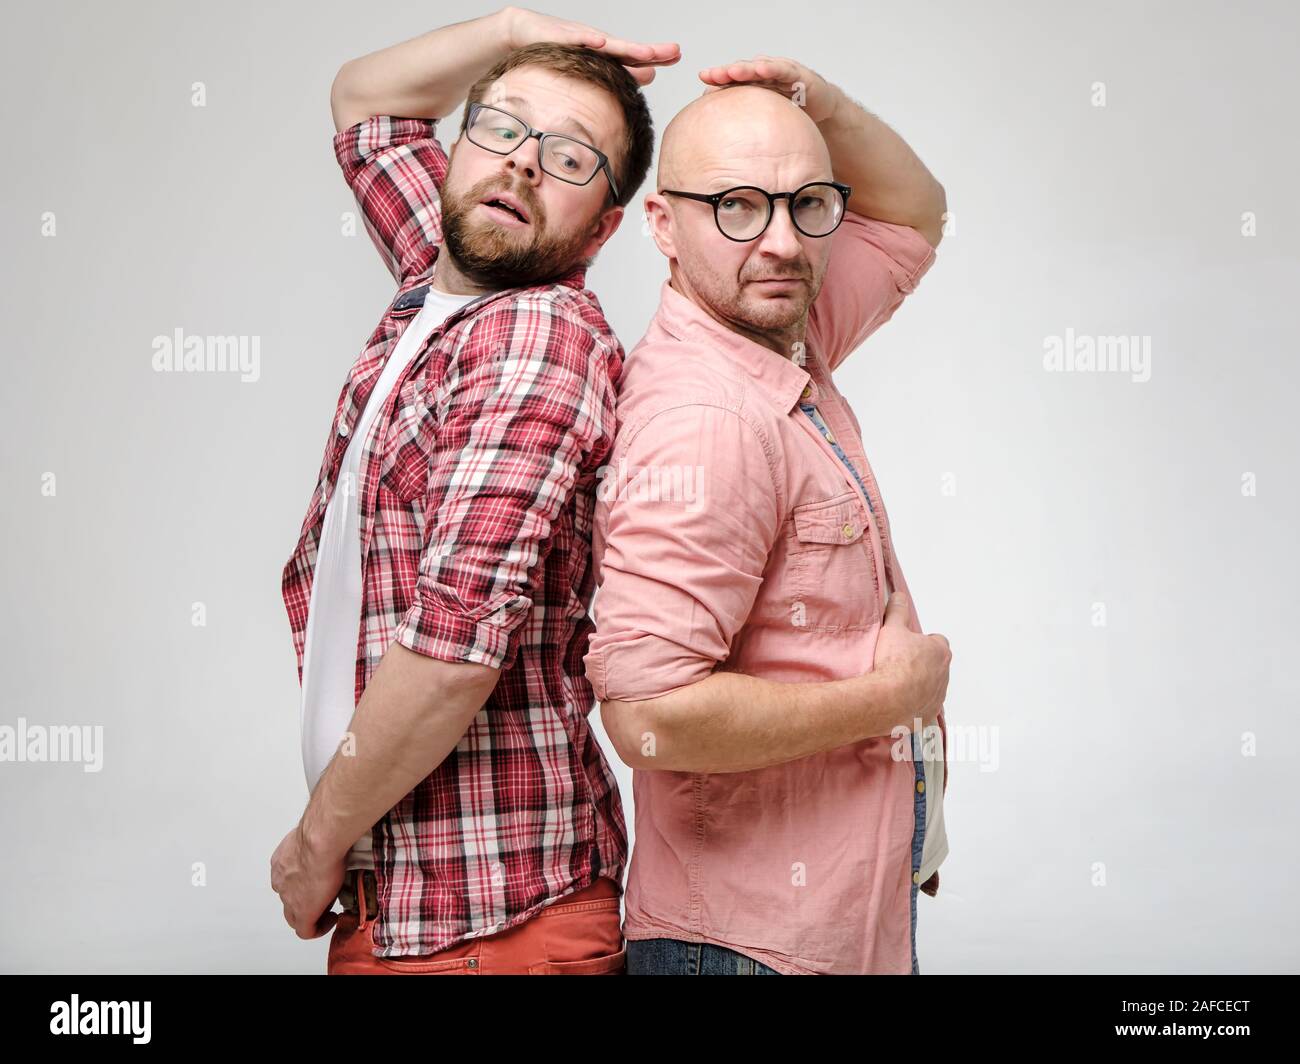 Men are measured by growth, they stood with their backs to each other as in childhood and are trying to determine who is taller. Stock Photo